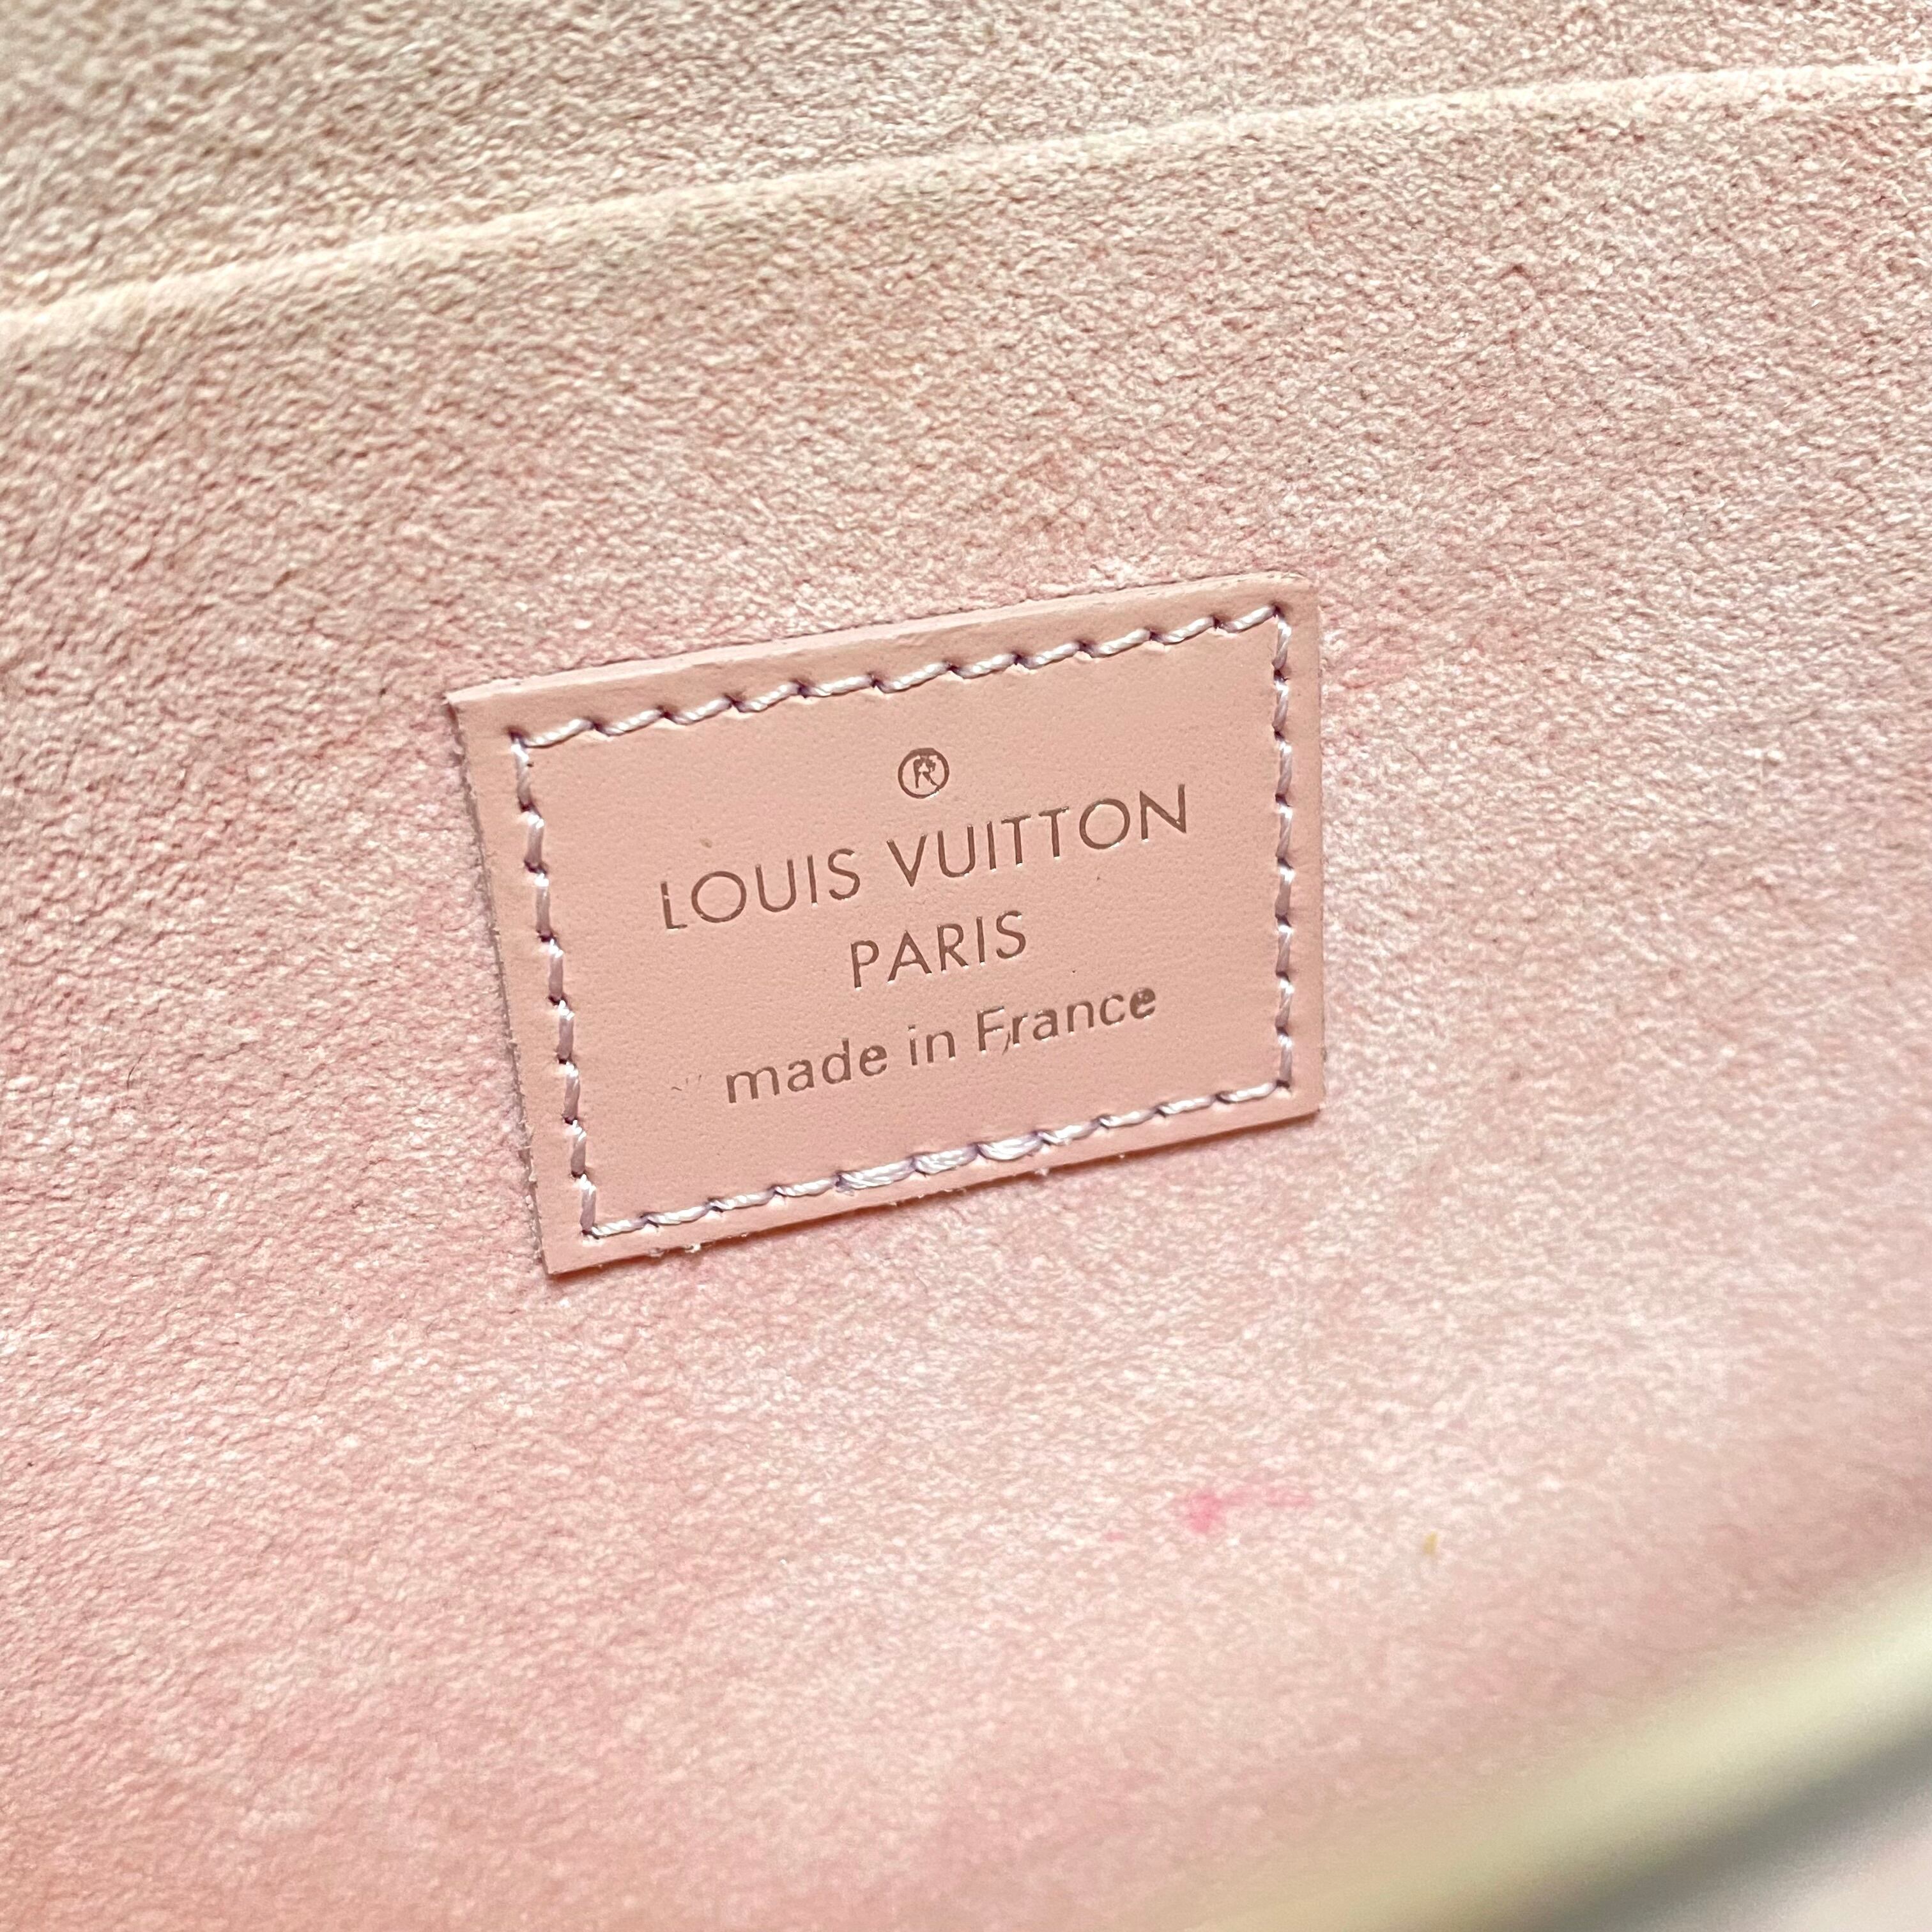 LOUIS VUITTON PARIS made in Franceピンク